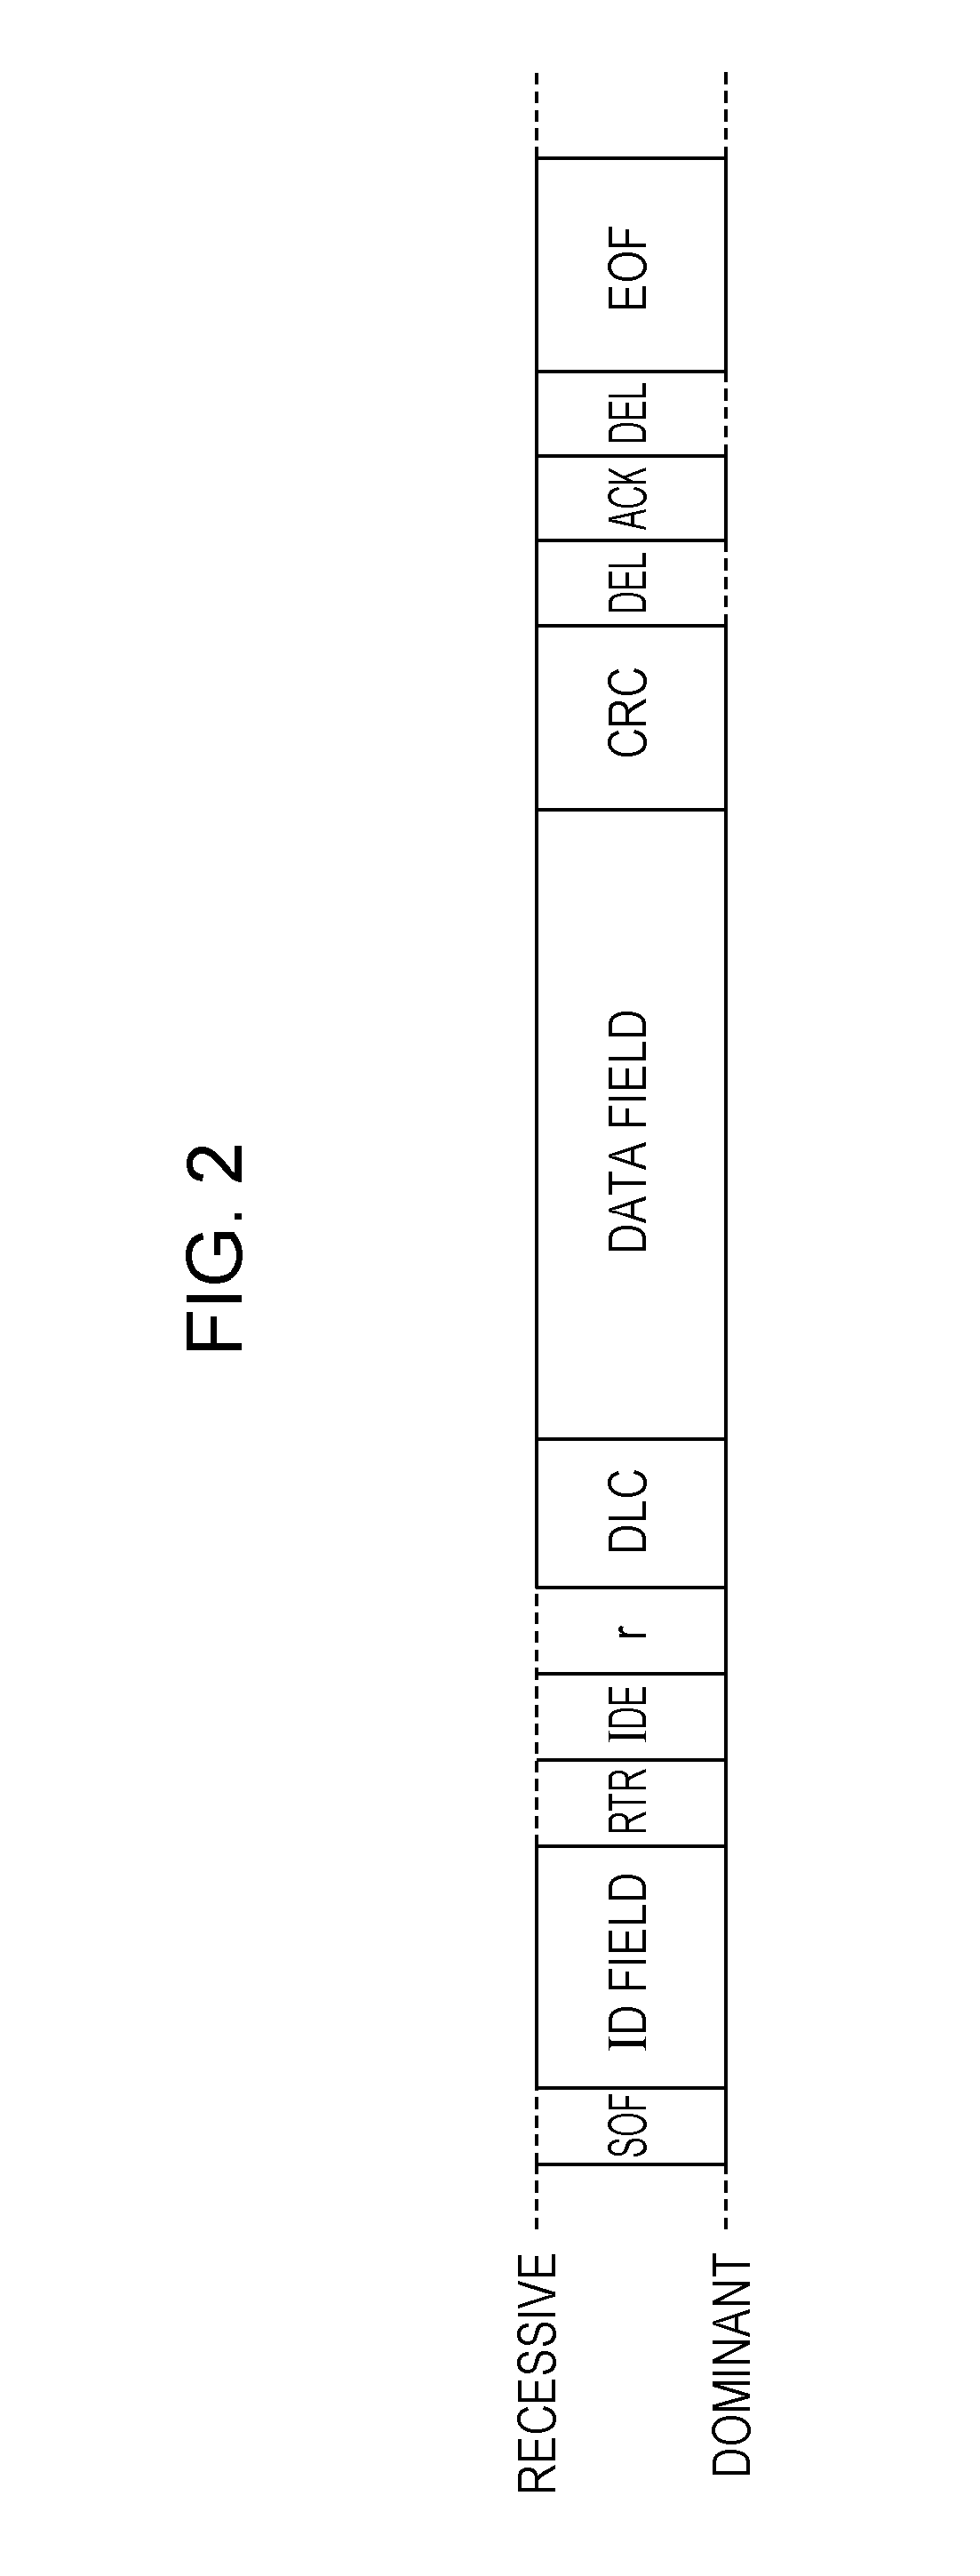 Abnormality detection method, abnormality detection apparatus, and abnormality detection system